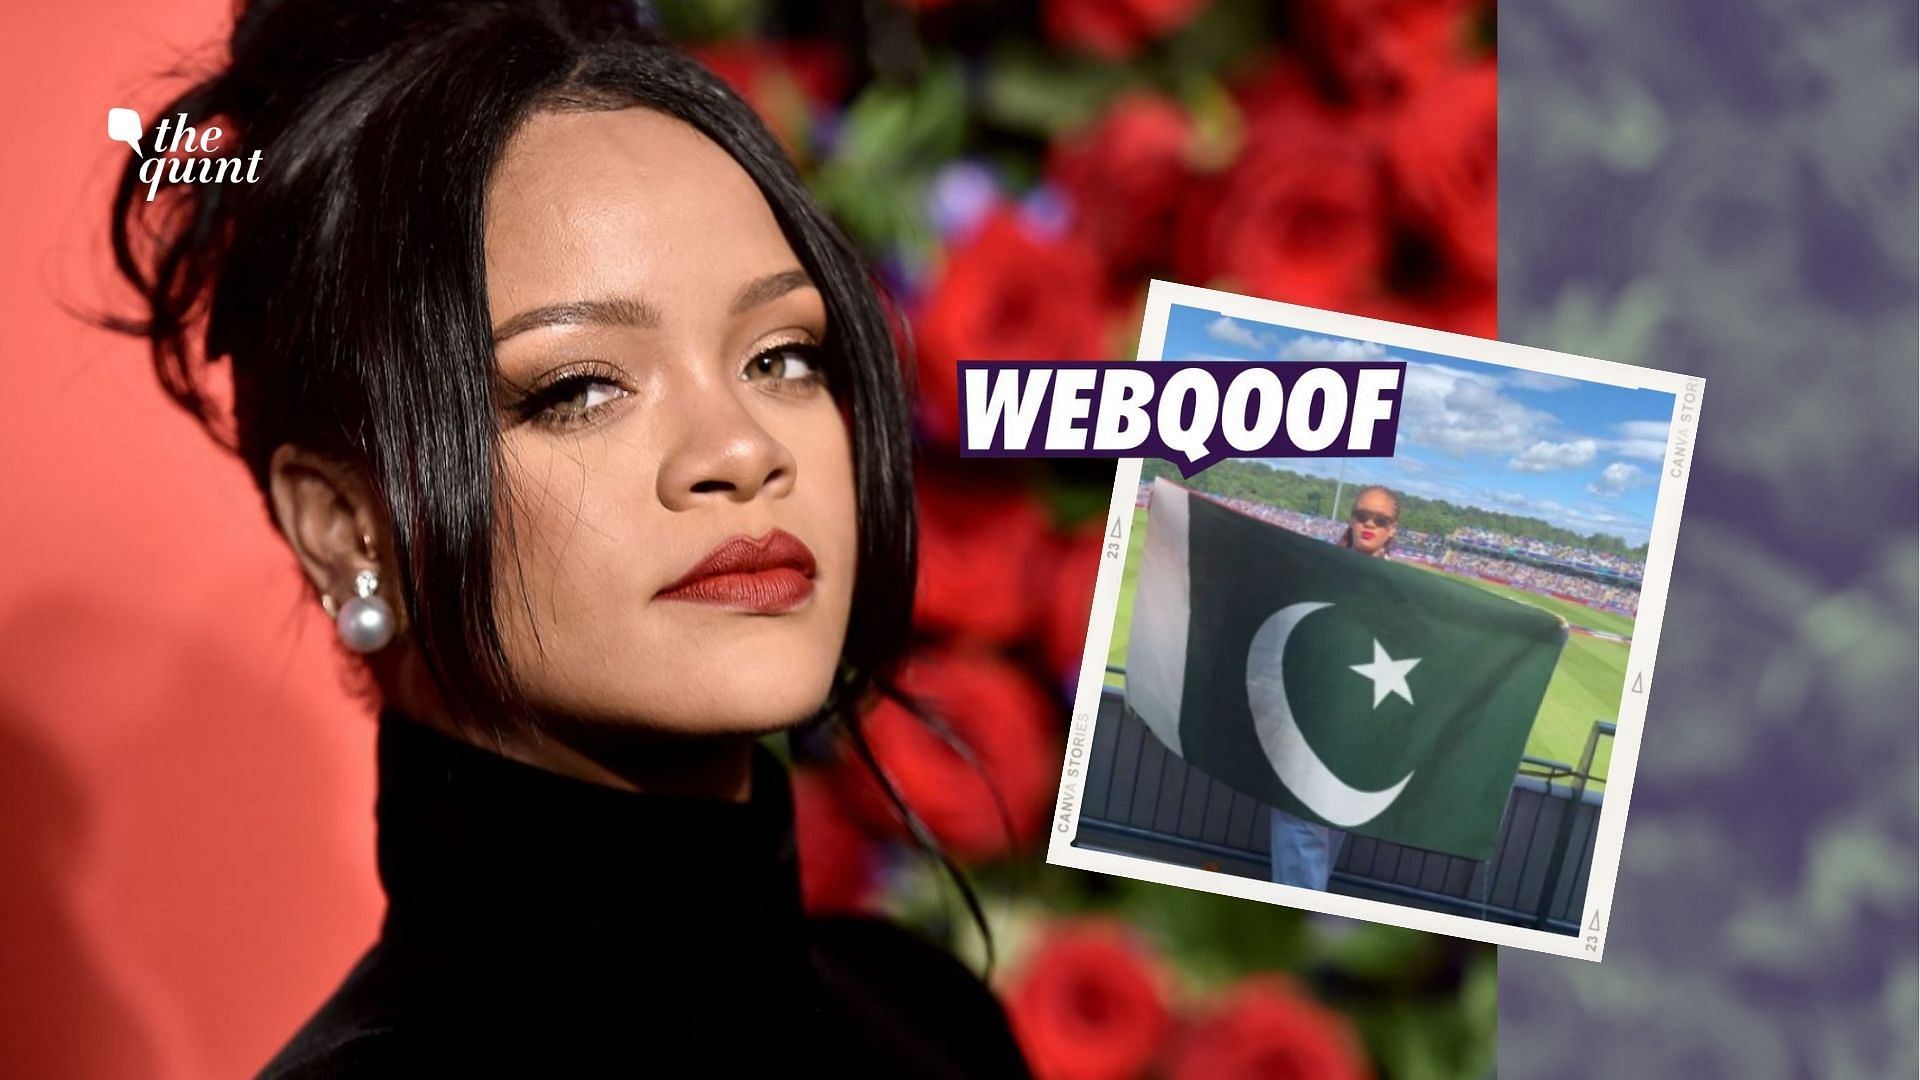 An image of Rihanna purportedly posing with a Pakistani flag went viral on social media hours after the song-songwriter <a href="https://www.thequint.com/news/india/international-figures-support-farmer-protests-in-india">tweeted in support of farmers</a>. Image used for representation.